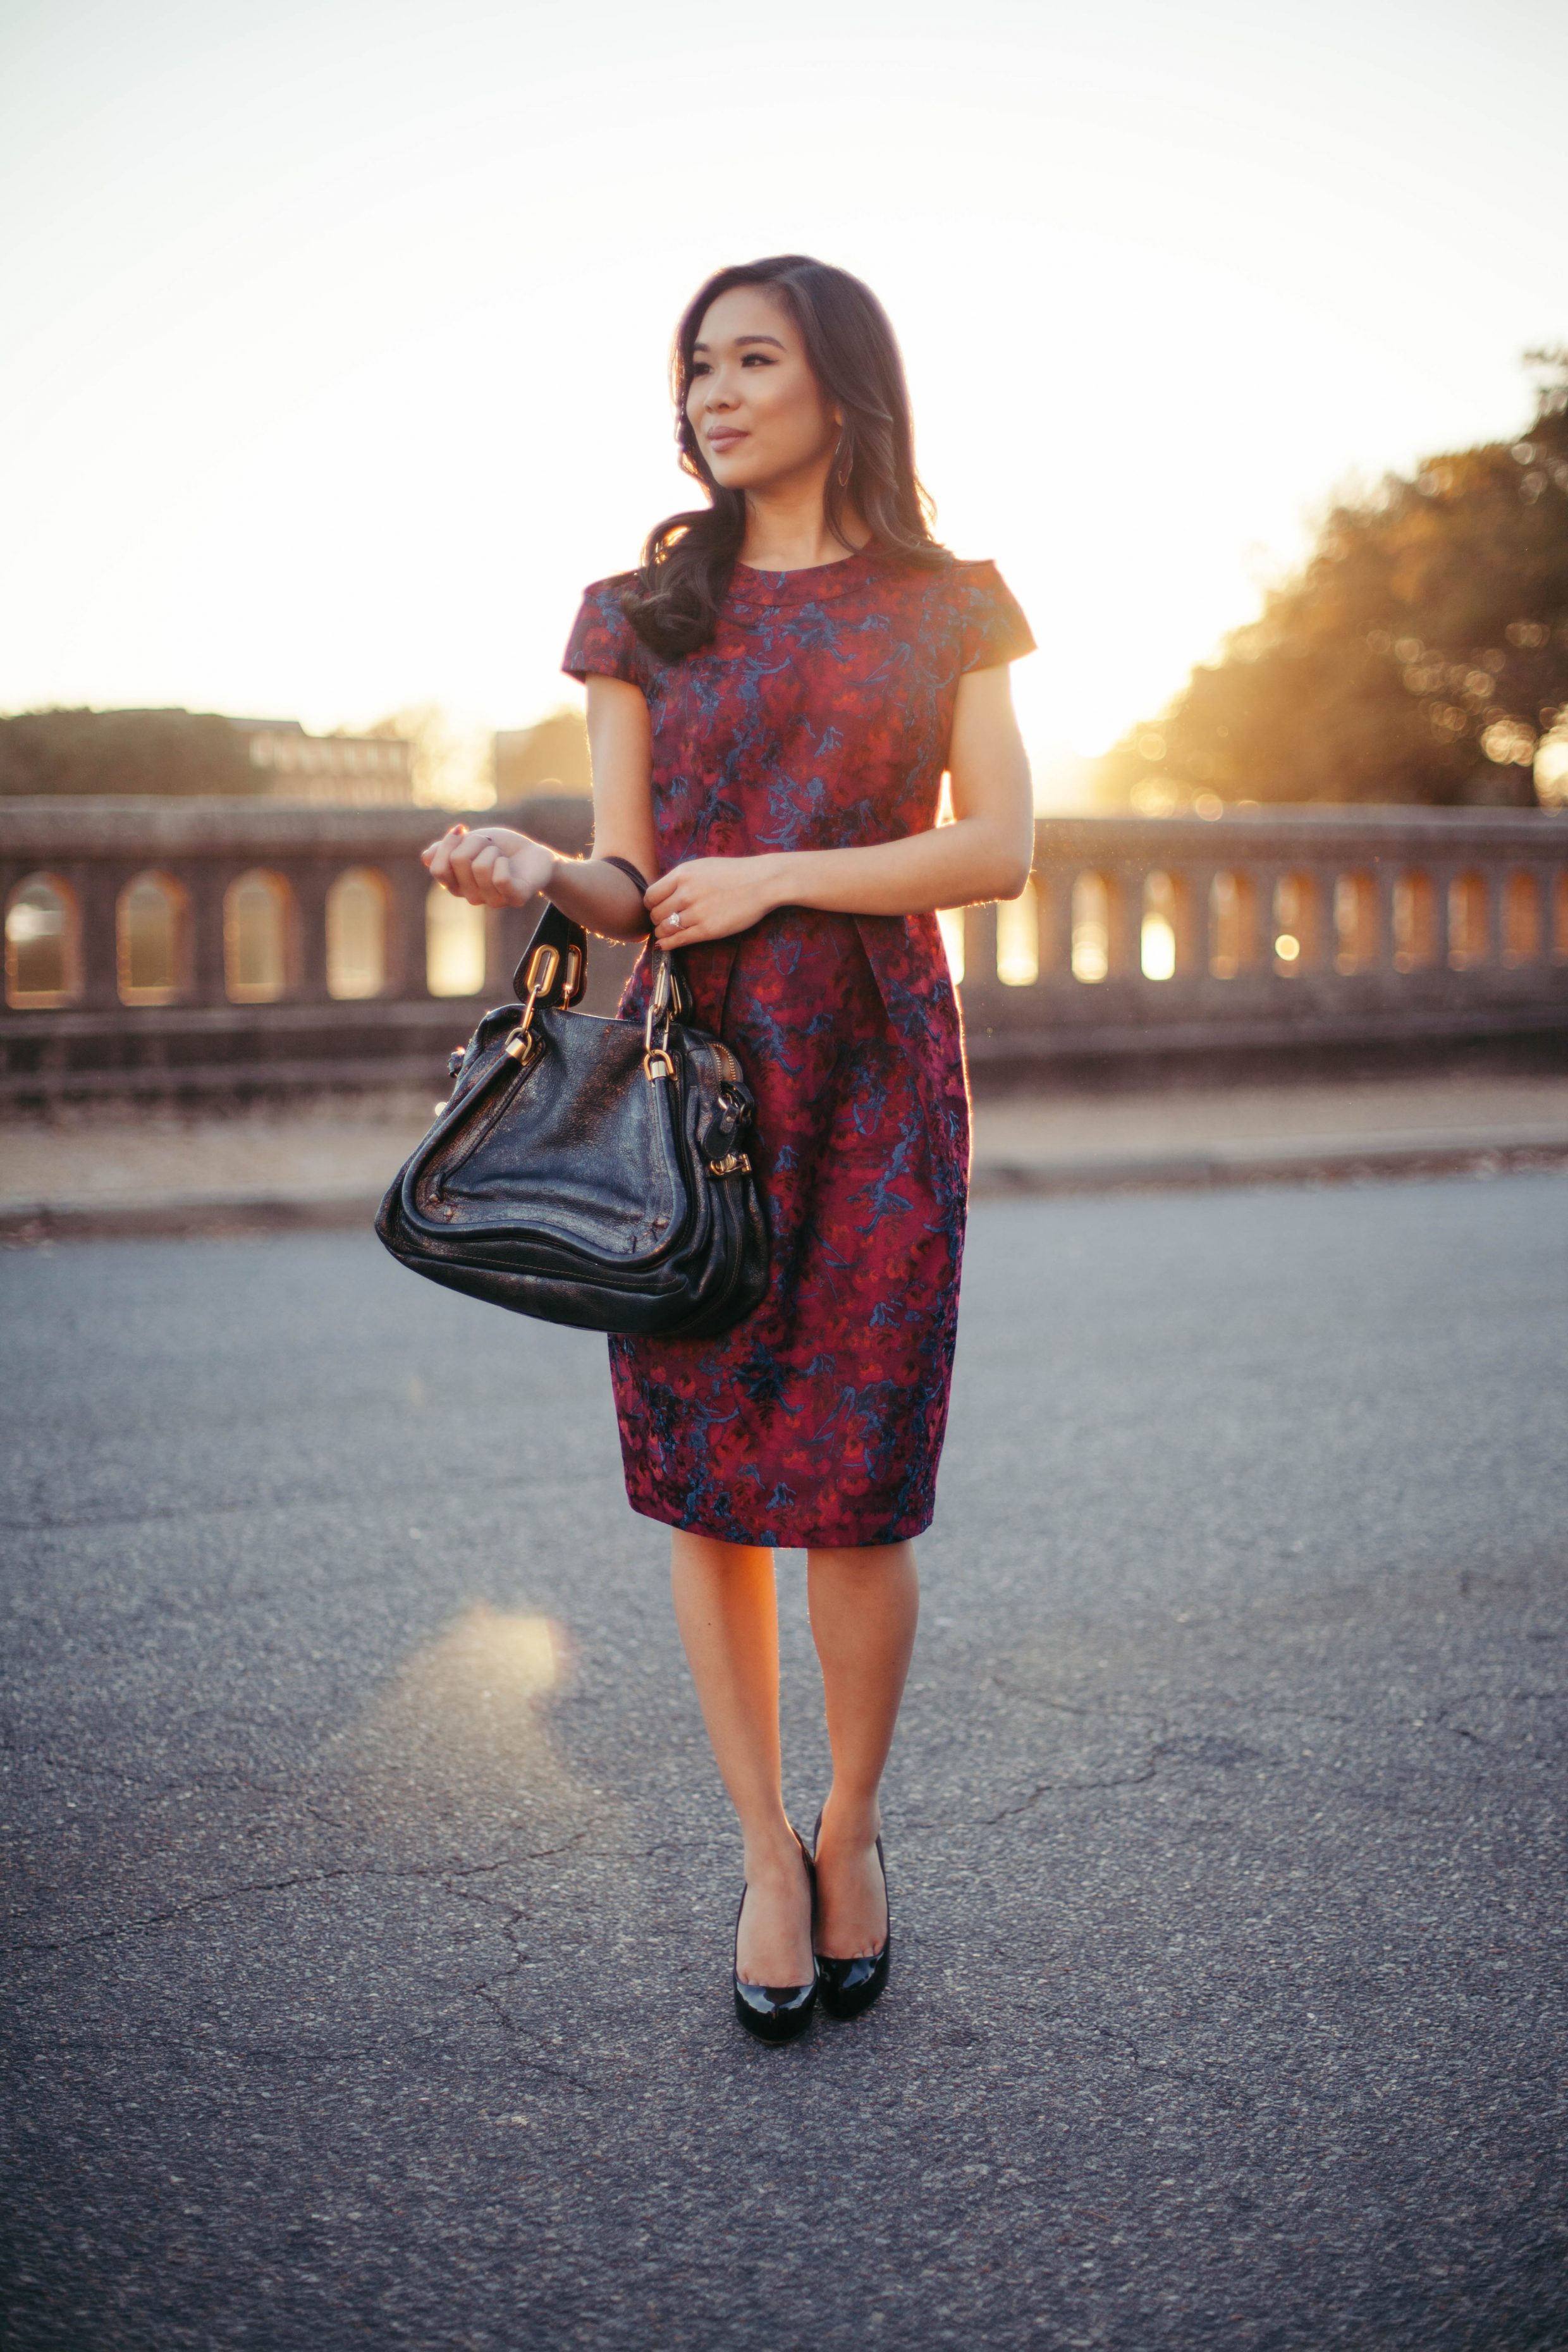 Date Night :: Brocade Dress at Sunset - Color & Chic